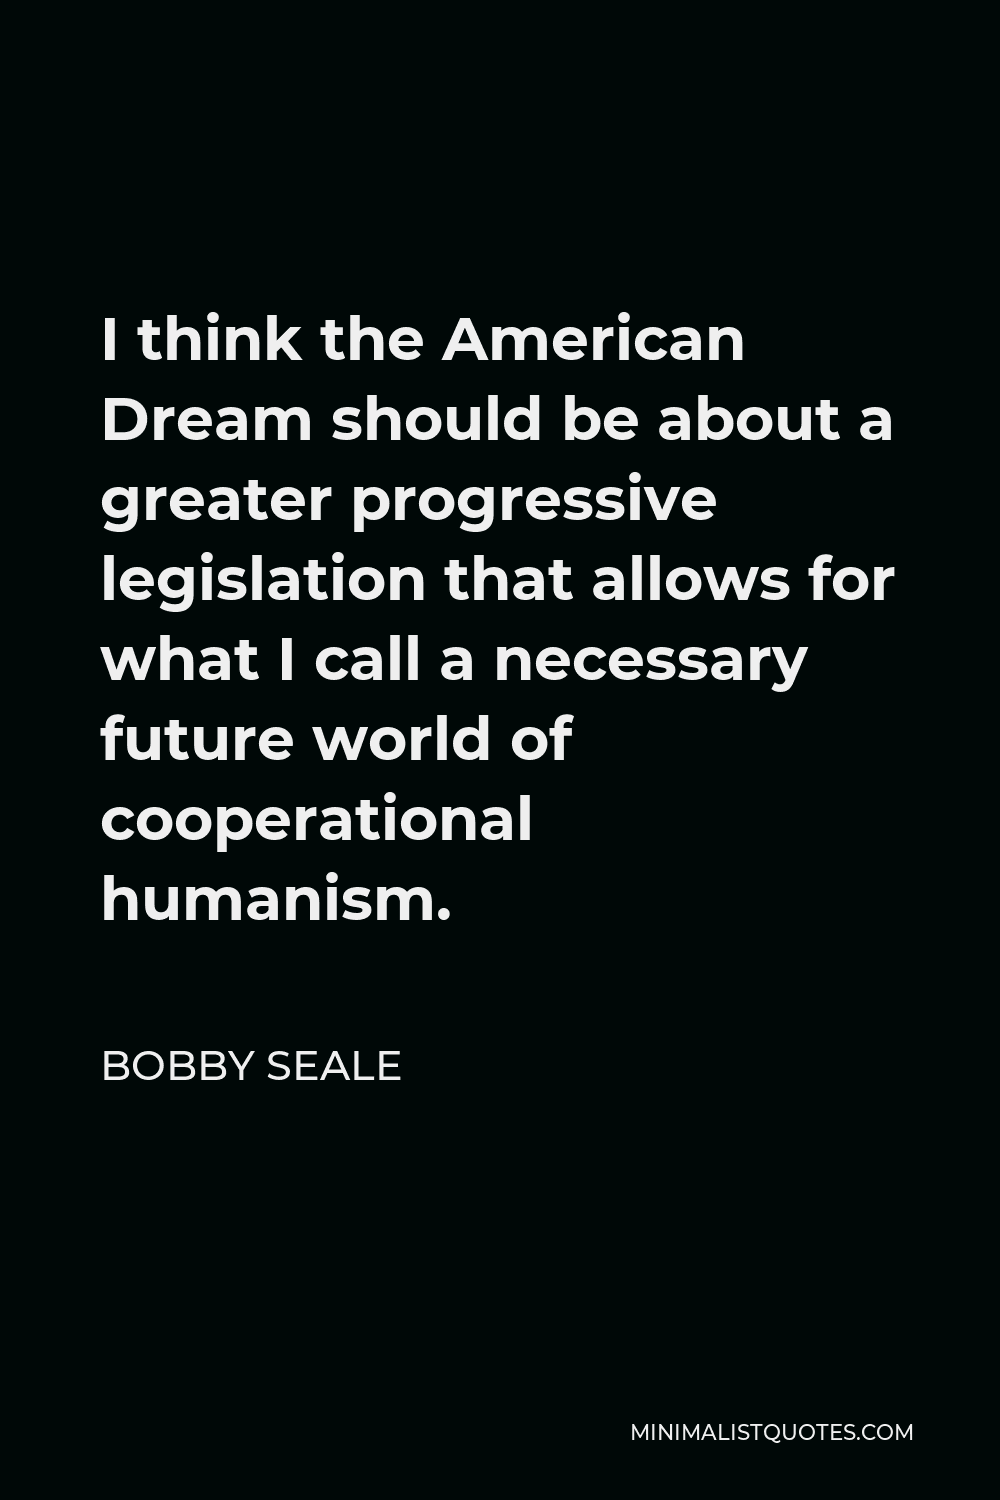 Bobby Seale Quote - I think the American Dream should be about a greater progressive legislation that allows for what I call a necessary future world of cooperational humanism.